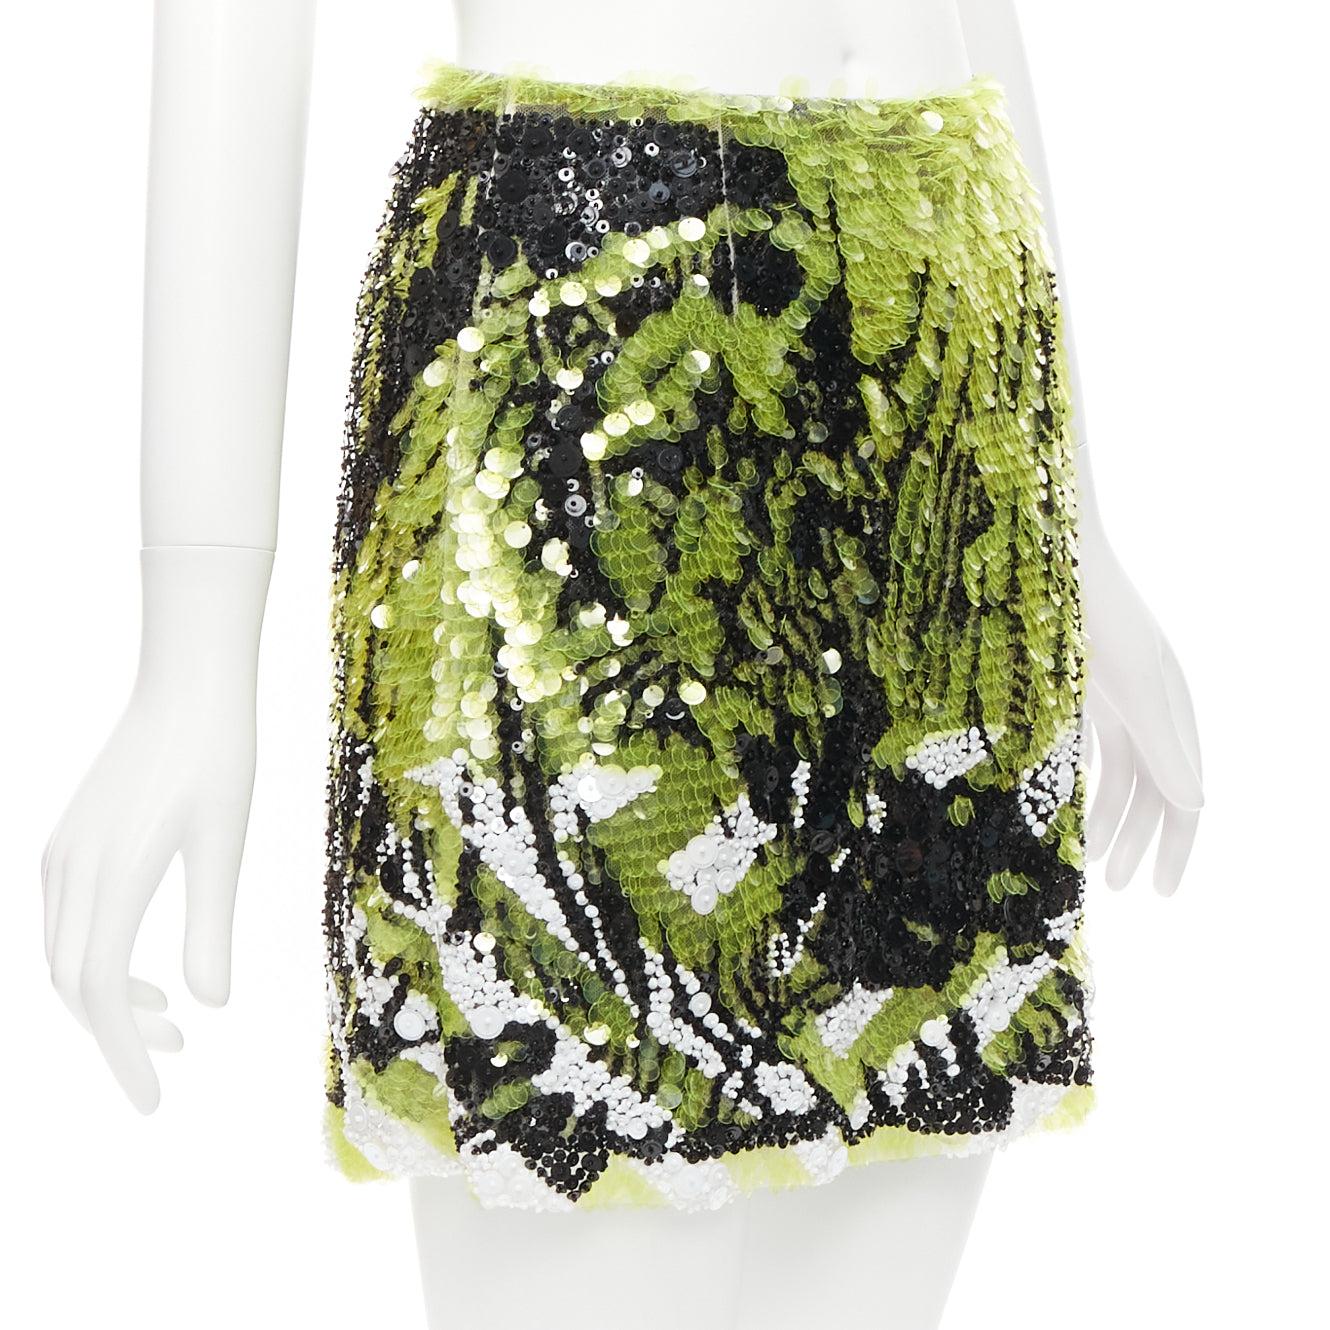 rare CHRISTIN DIOR D-Jungle Lion sequins pailette bead embellished skirt FR34
Reference: AAWC/A00604
Brand: Christian Dior
Designer: Maria Grazia Chiuri
Collection: D-Jungle - Runway
Material: Polyamide
Color: Green, Purple
Pattern: Graphic
Closure: